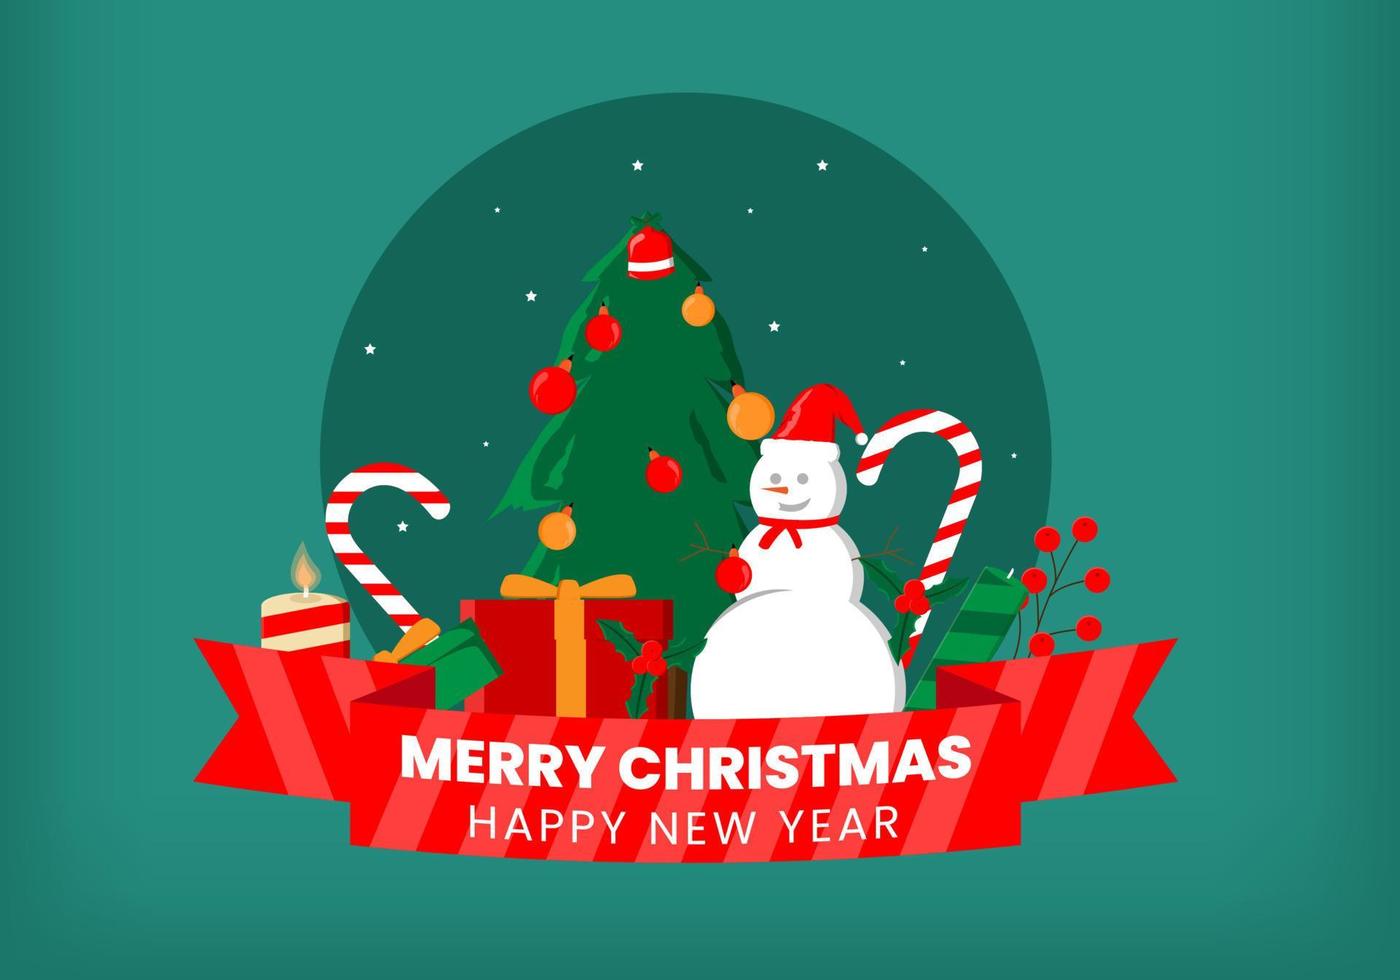 Amazing Christmas Card Design with christmas elements vector